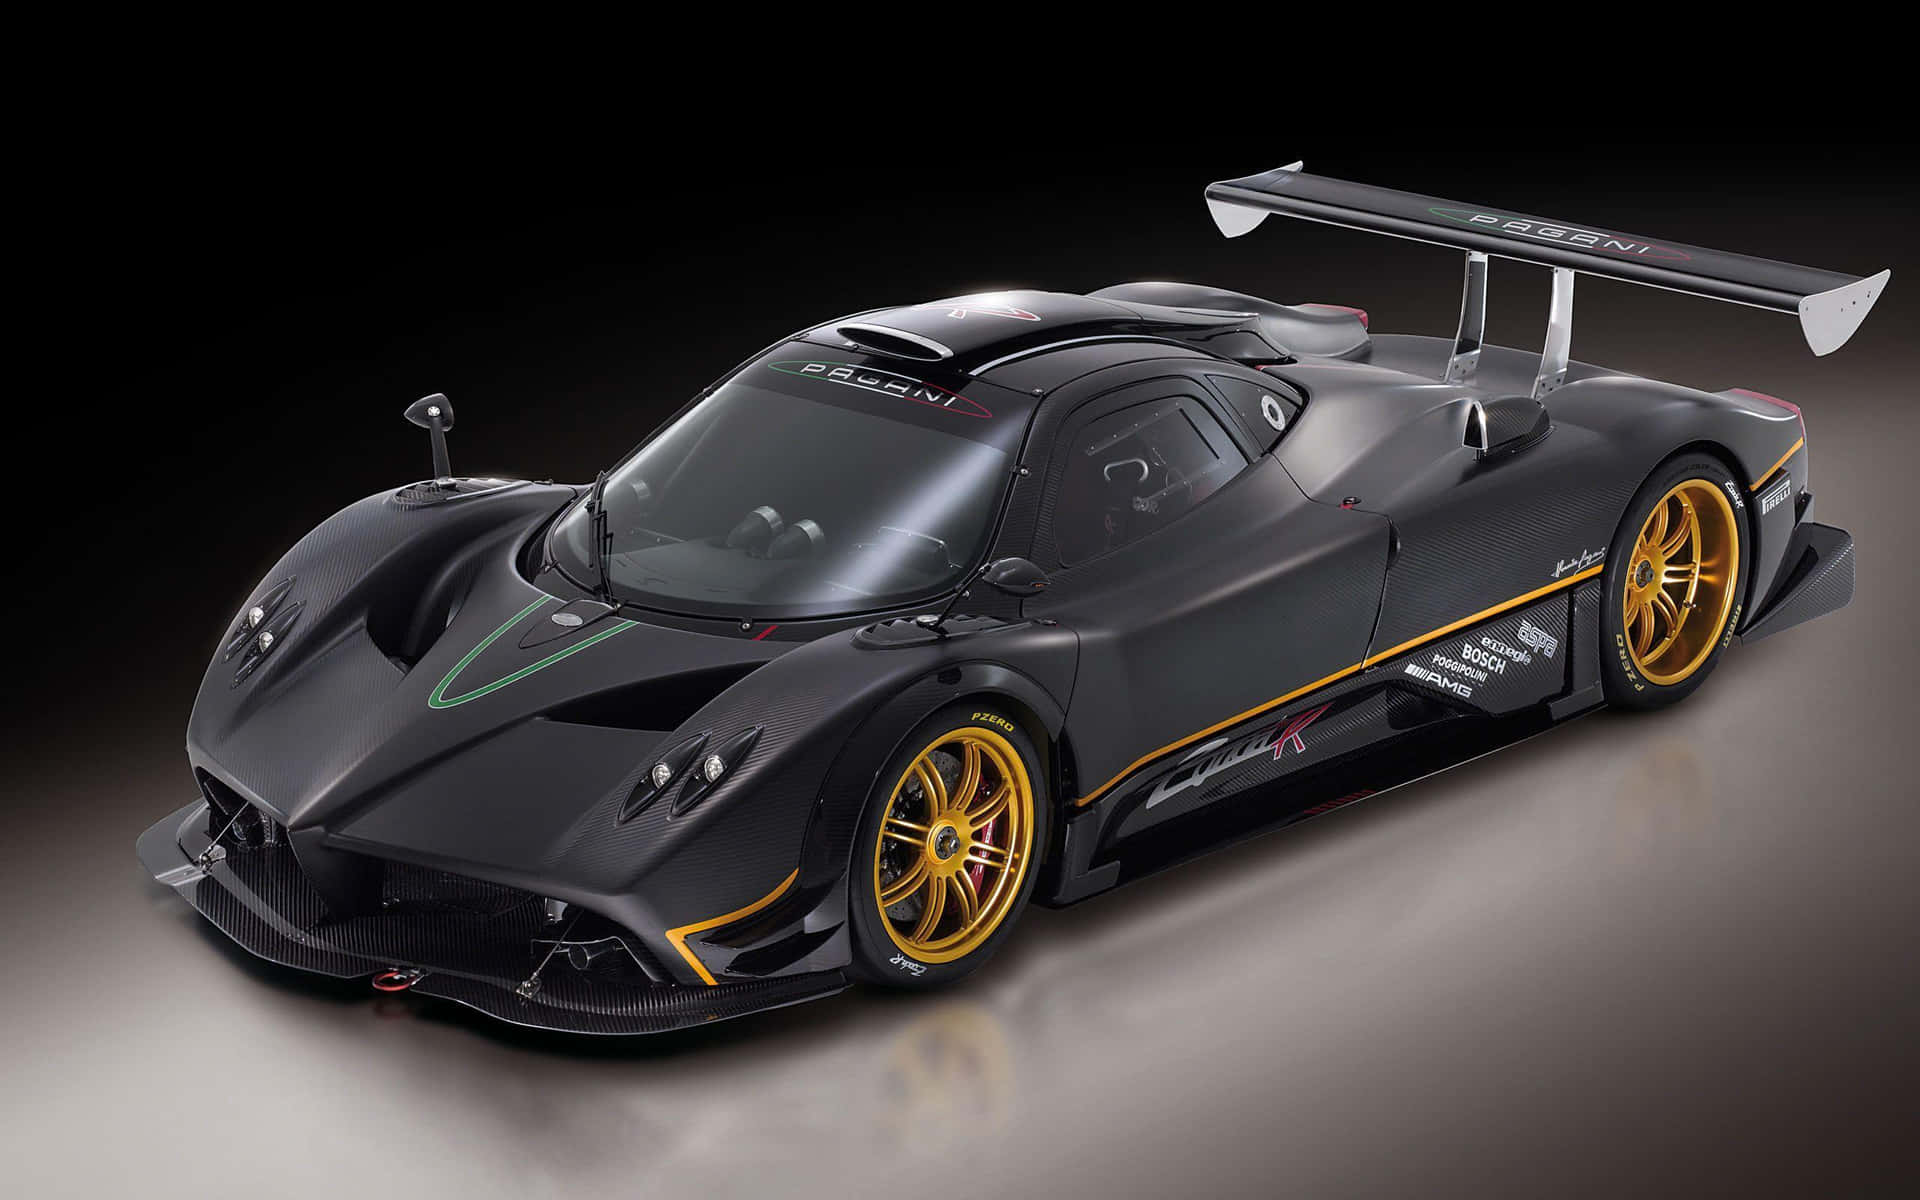 Stunning Image Of The Iconic Pagani Zonda F Against A Striking Scenic Background Wallpaper